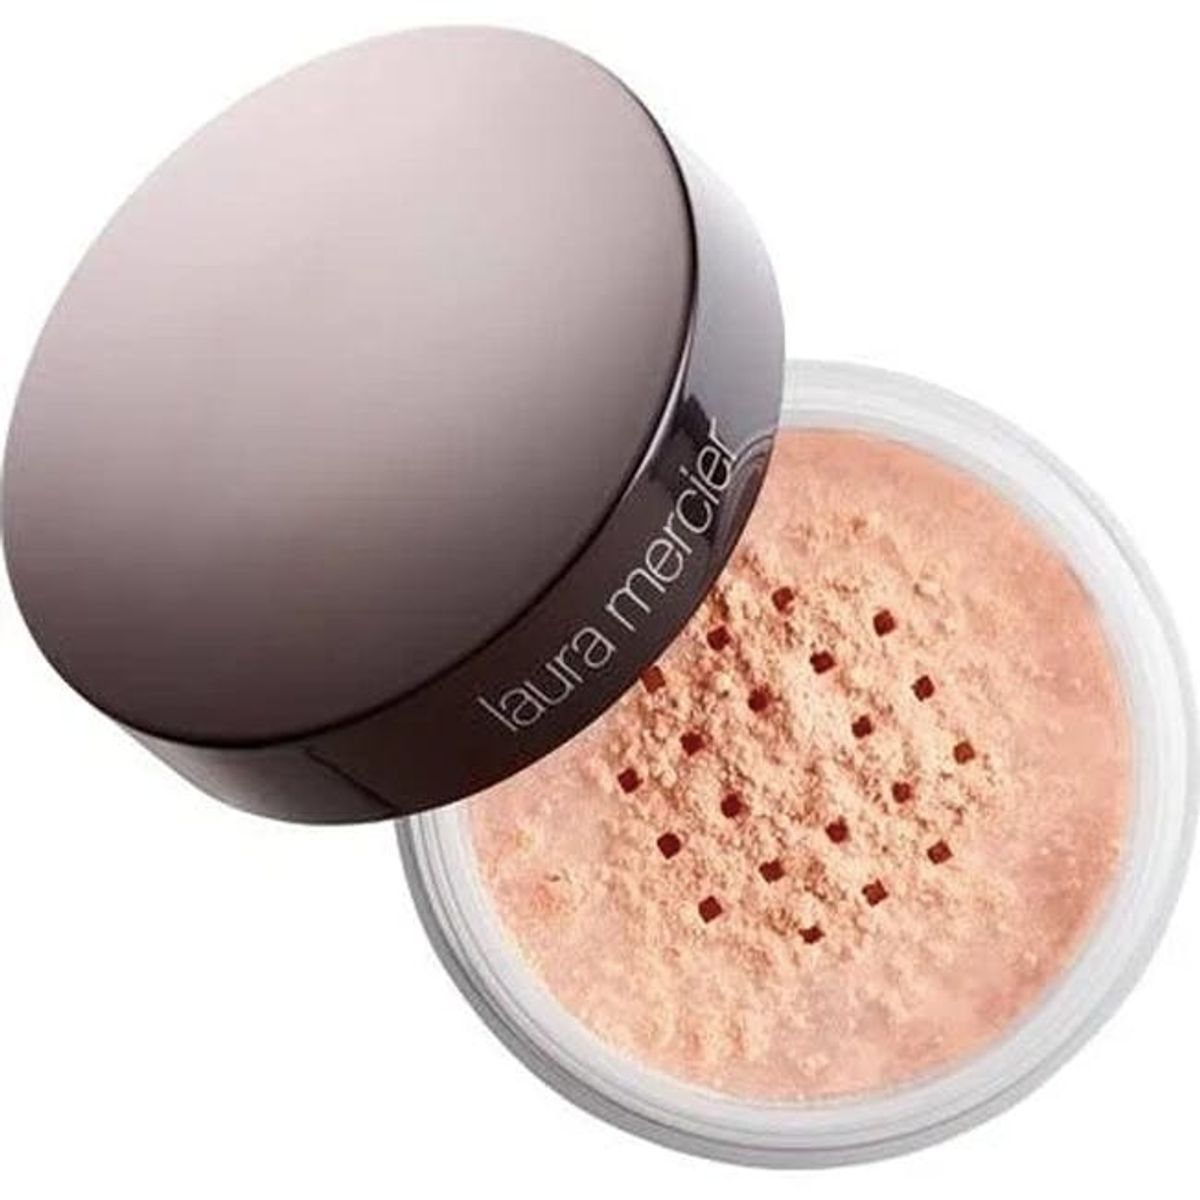 9 Illuminating Setting Powders That Create a Filtered Beauty Effect